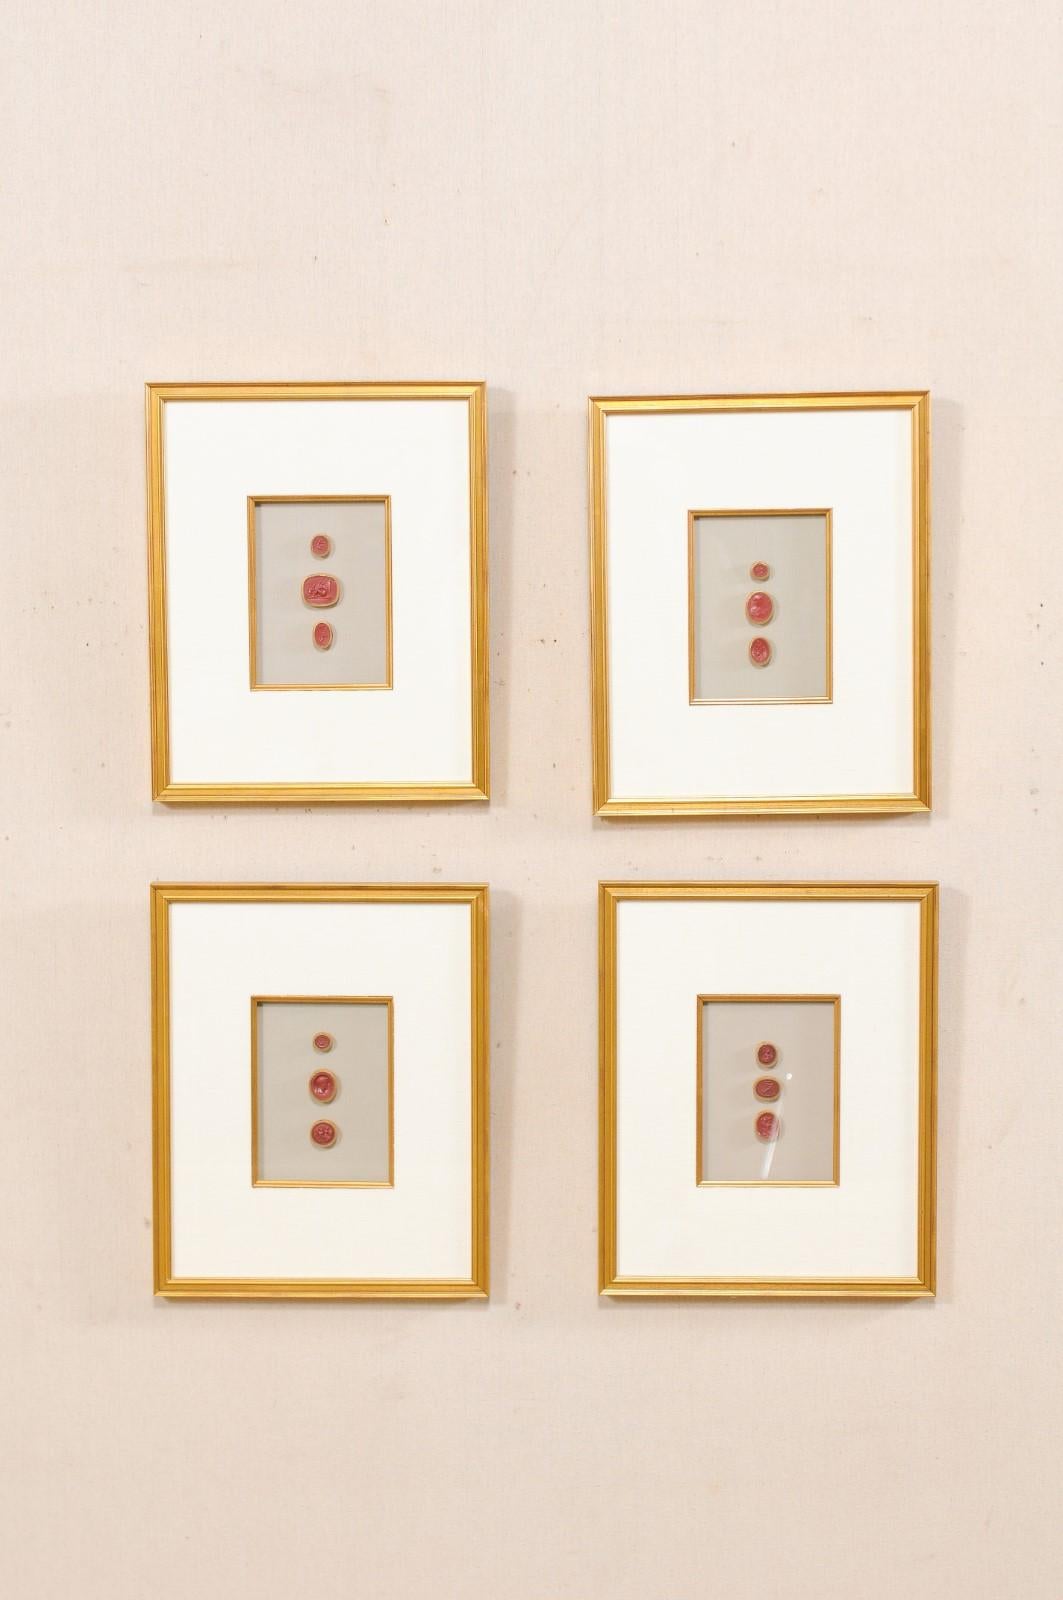 A set of four neoclassical Italian red intaglios from the mid-20th century, displayed nicely within gold custom frames. This set of red colored vintage Italian intaglios have been set within custom wood framed shadow boxes with gold accents. These